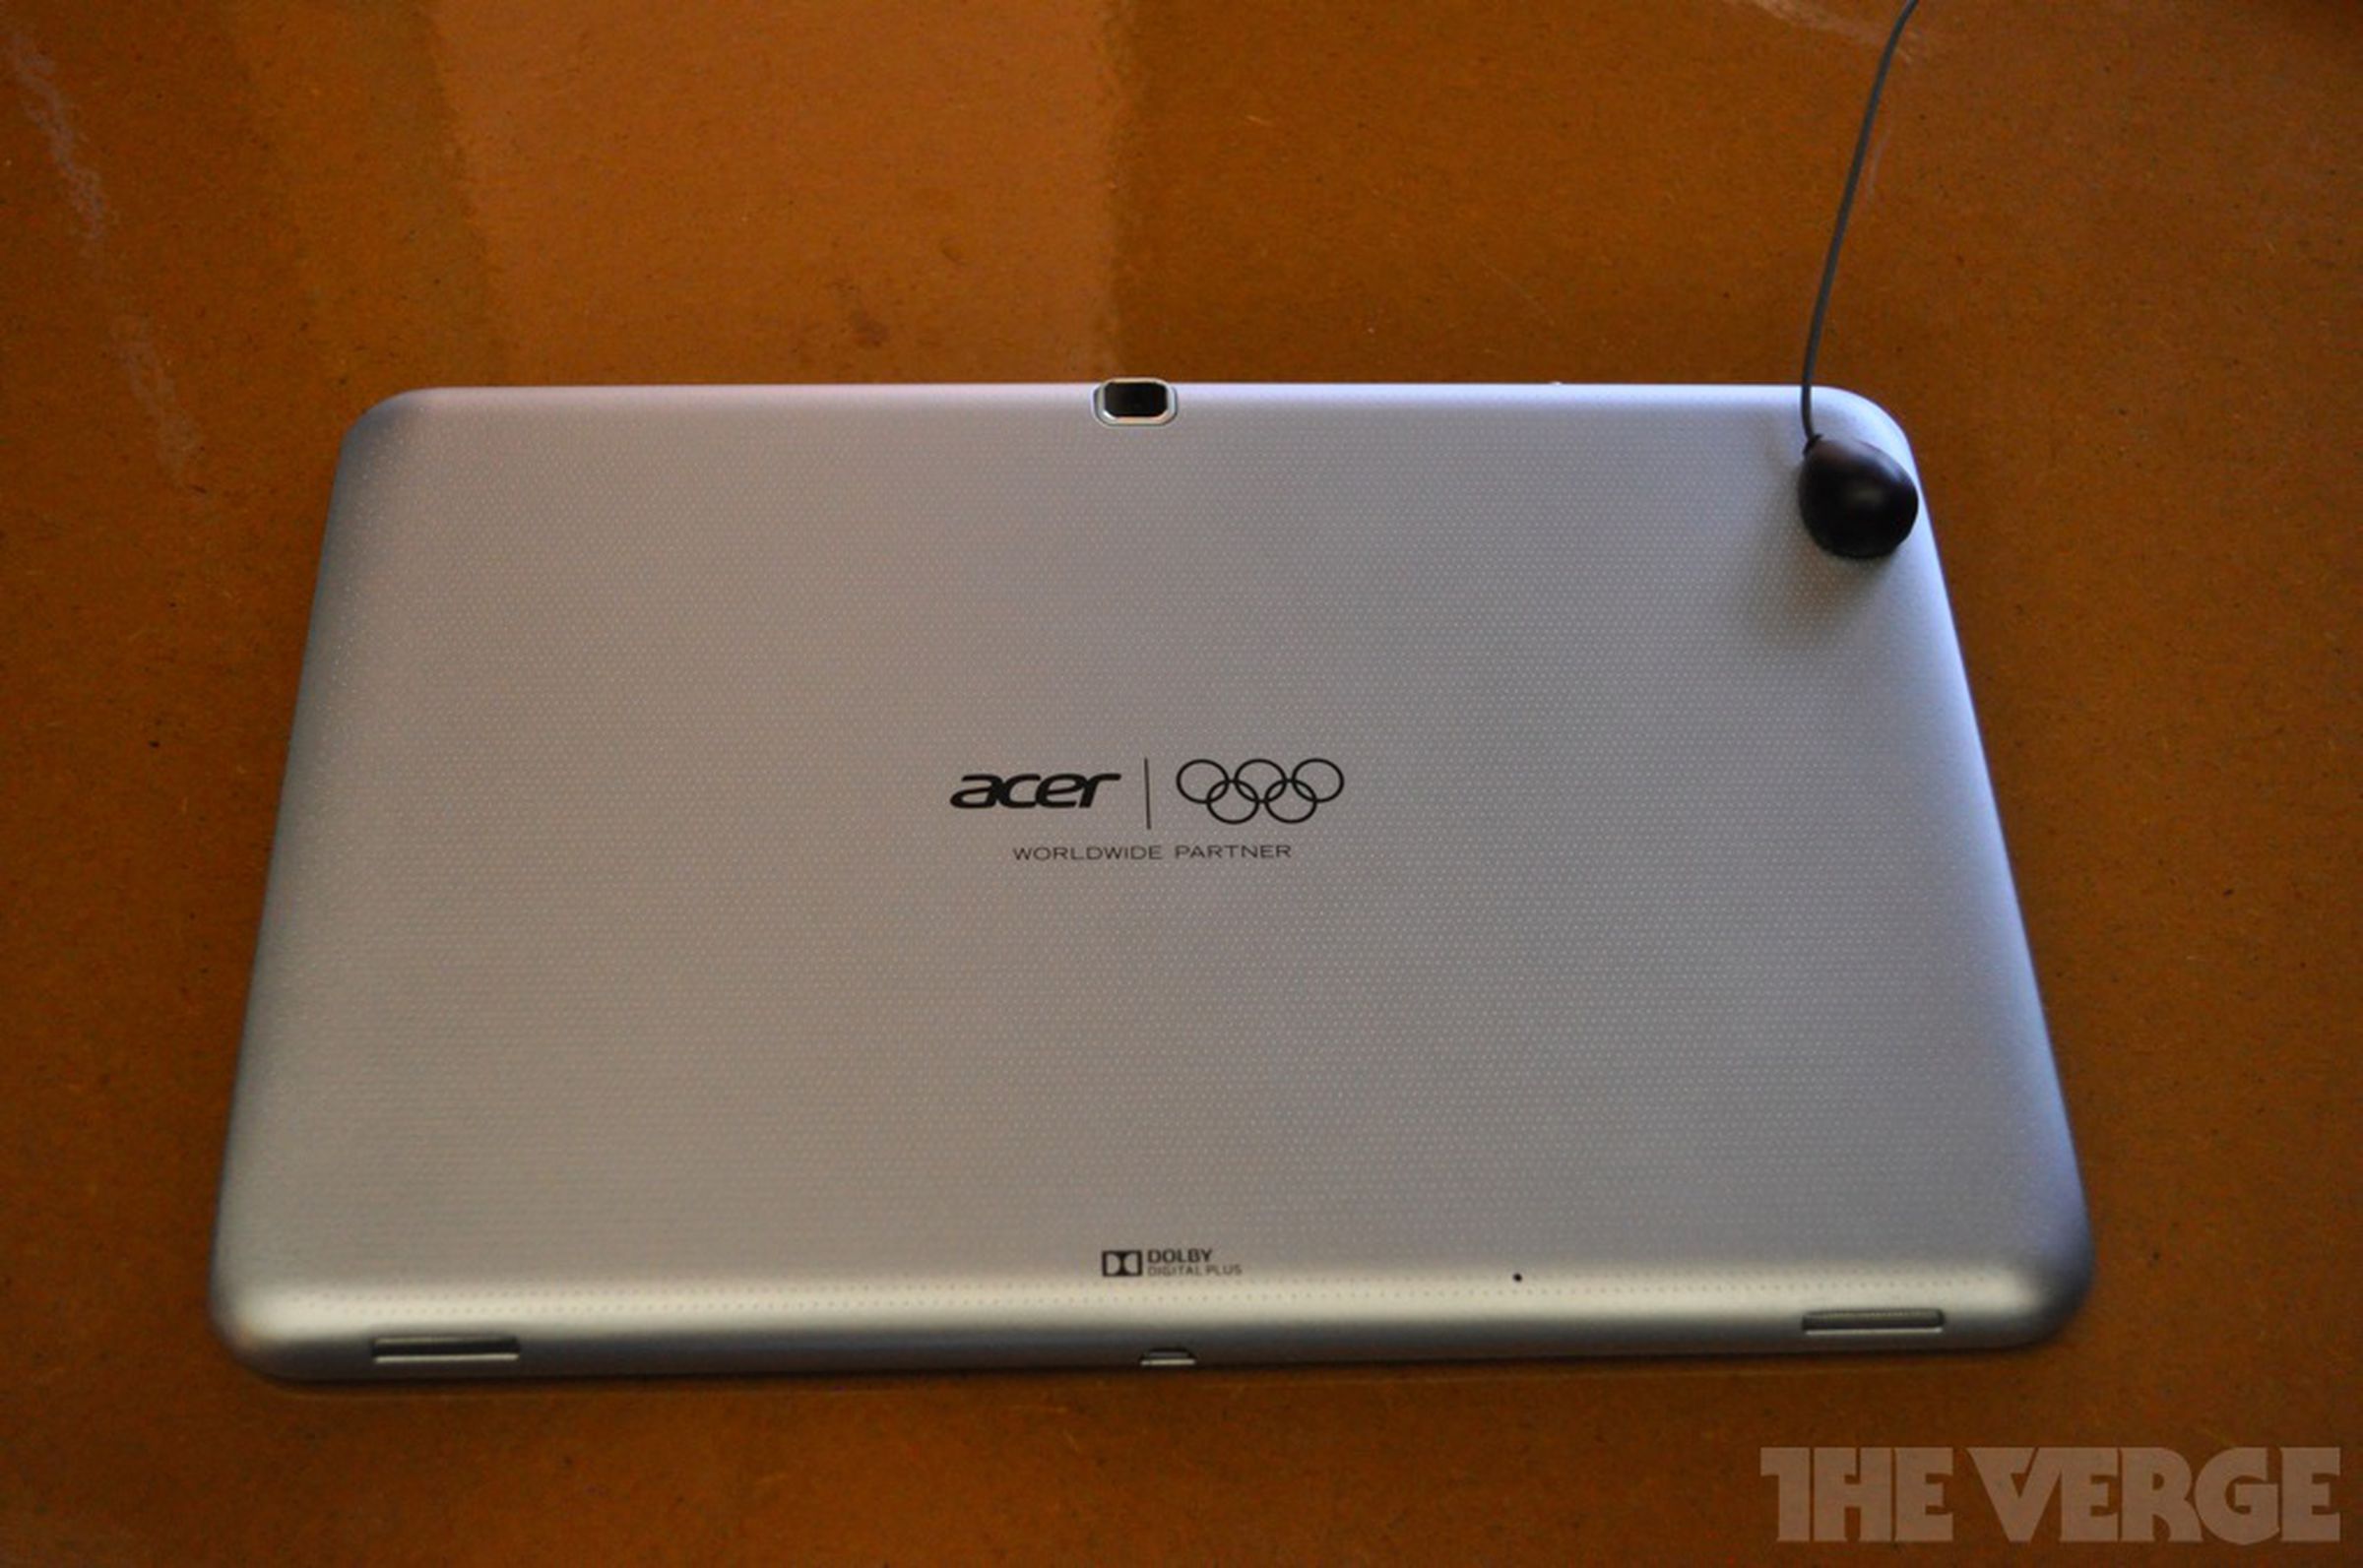 Acer Iconia Tab Olympic Games Edition hands-on photos